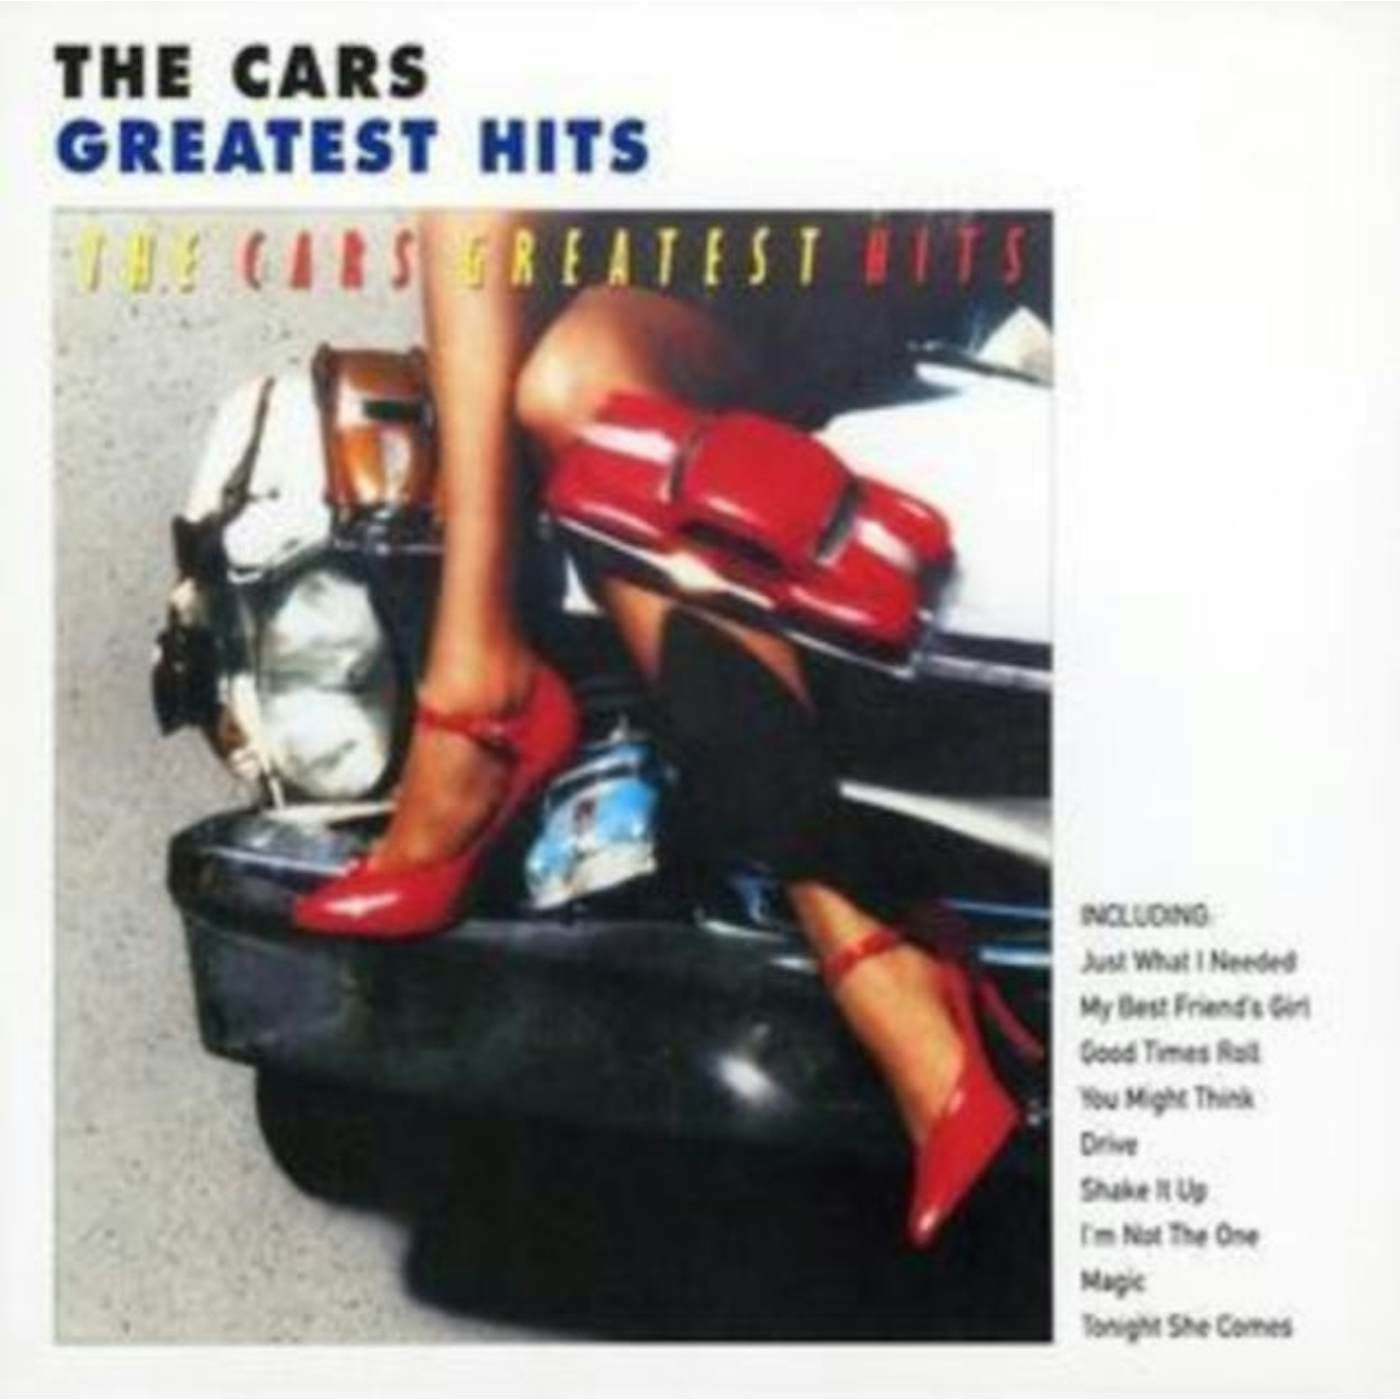 The Cars CD - The Greatest Hits